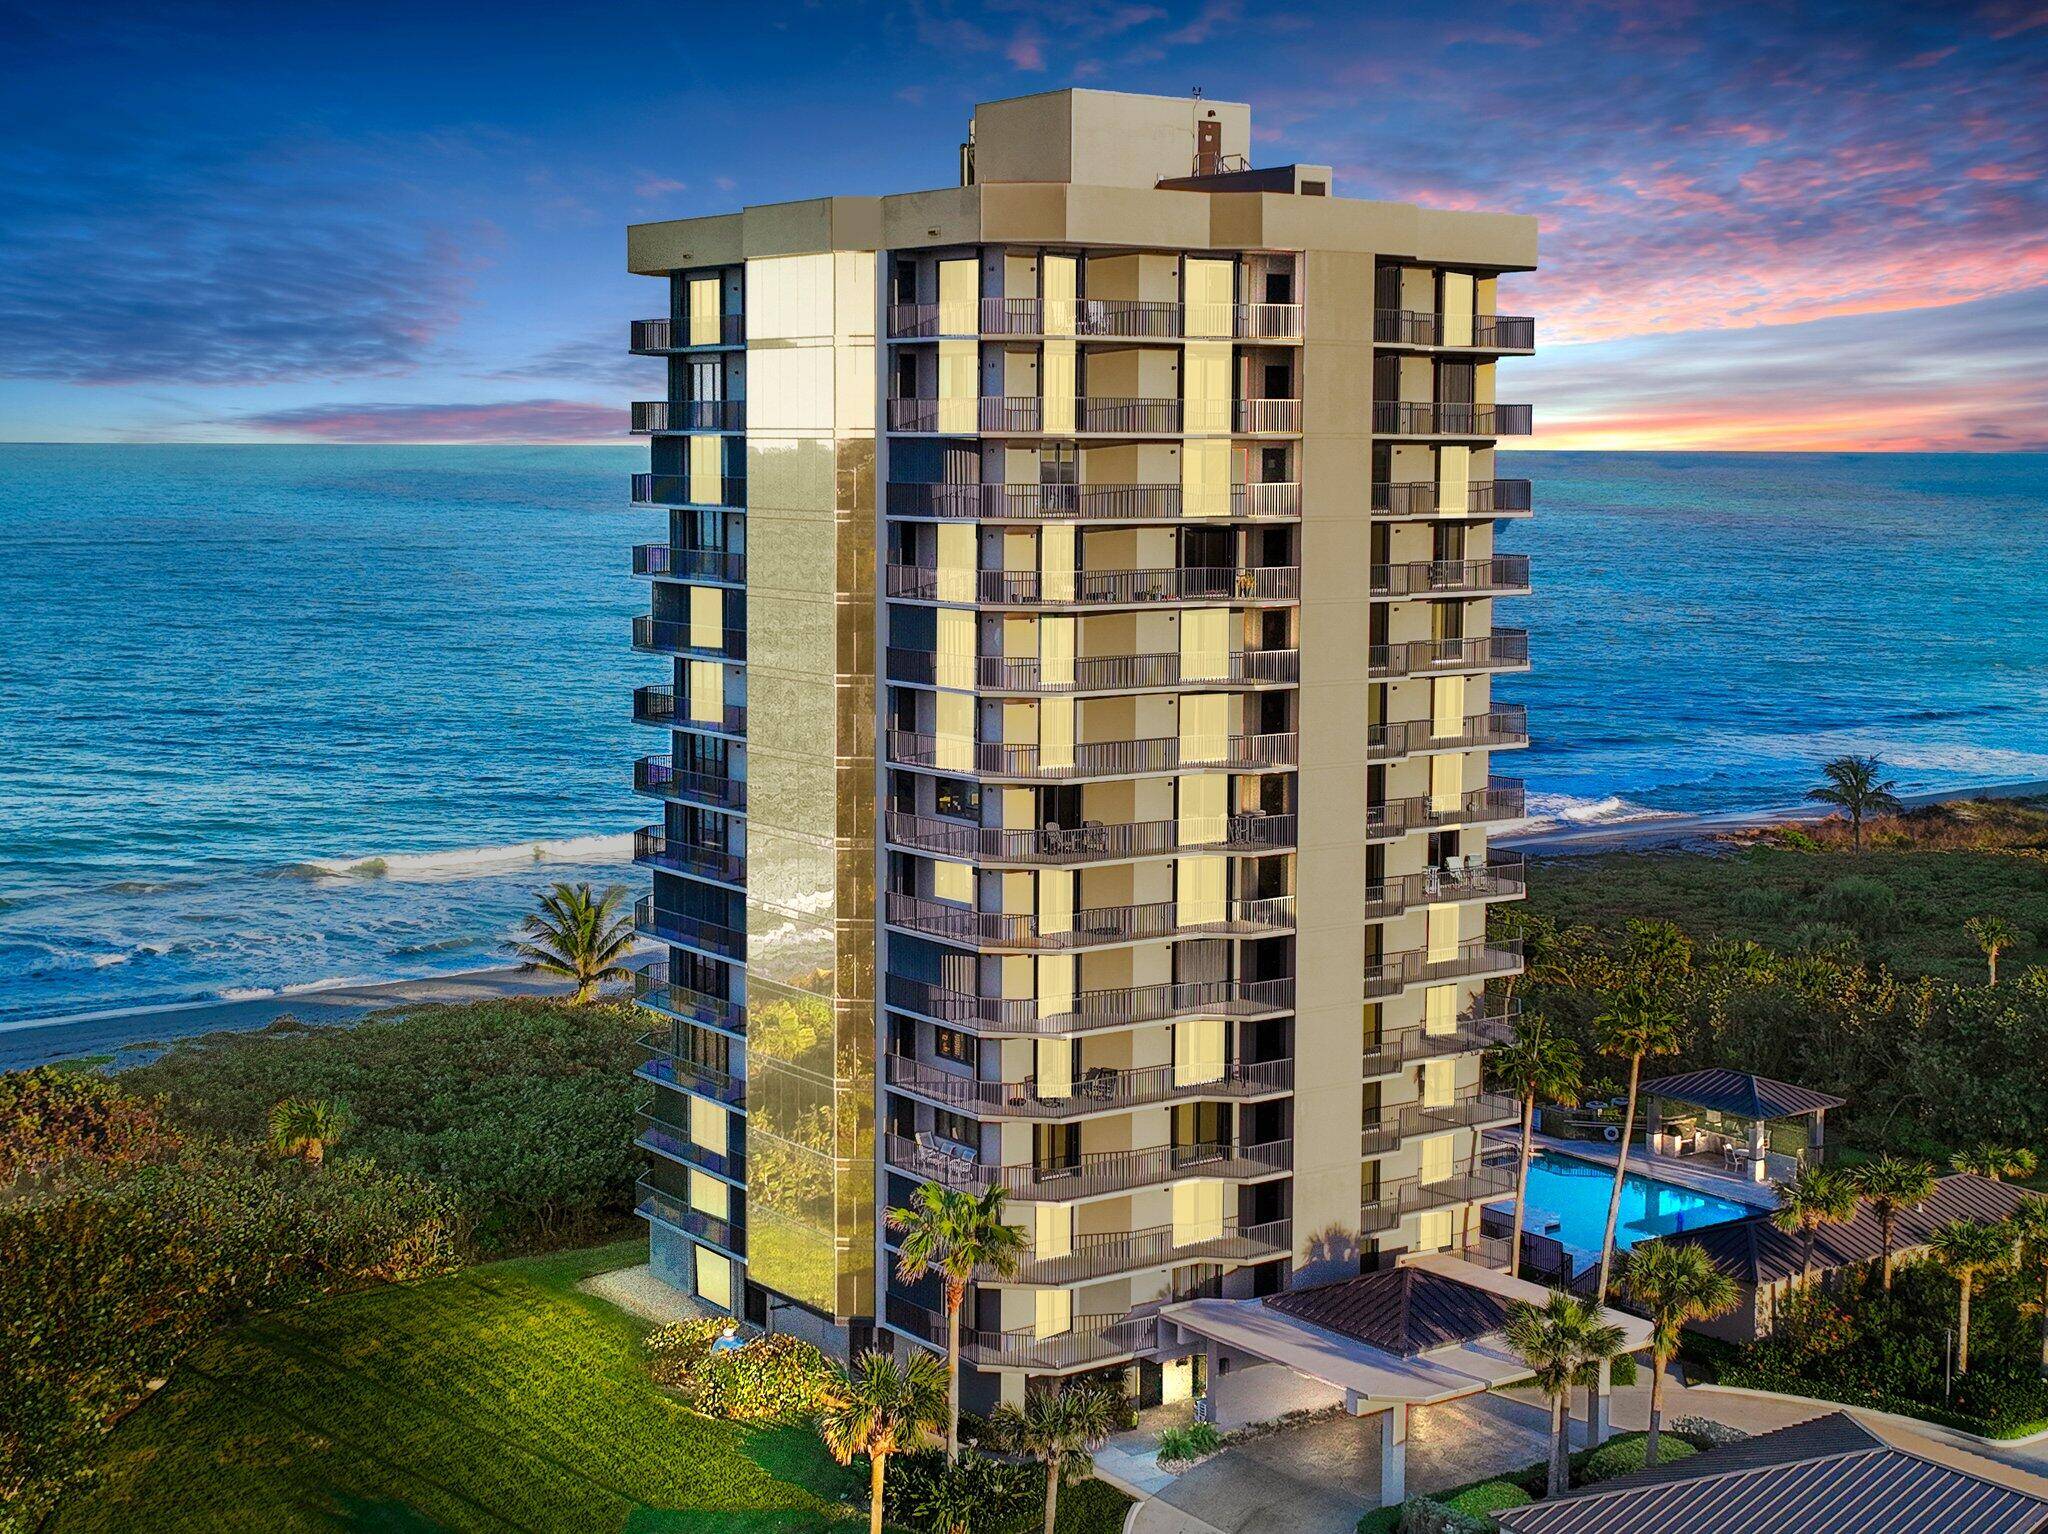 Visions is undeniably a one of a kind oceanfront community.